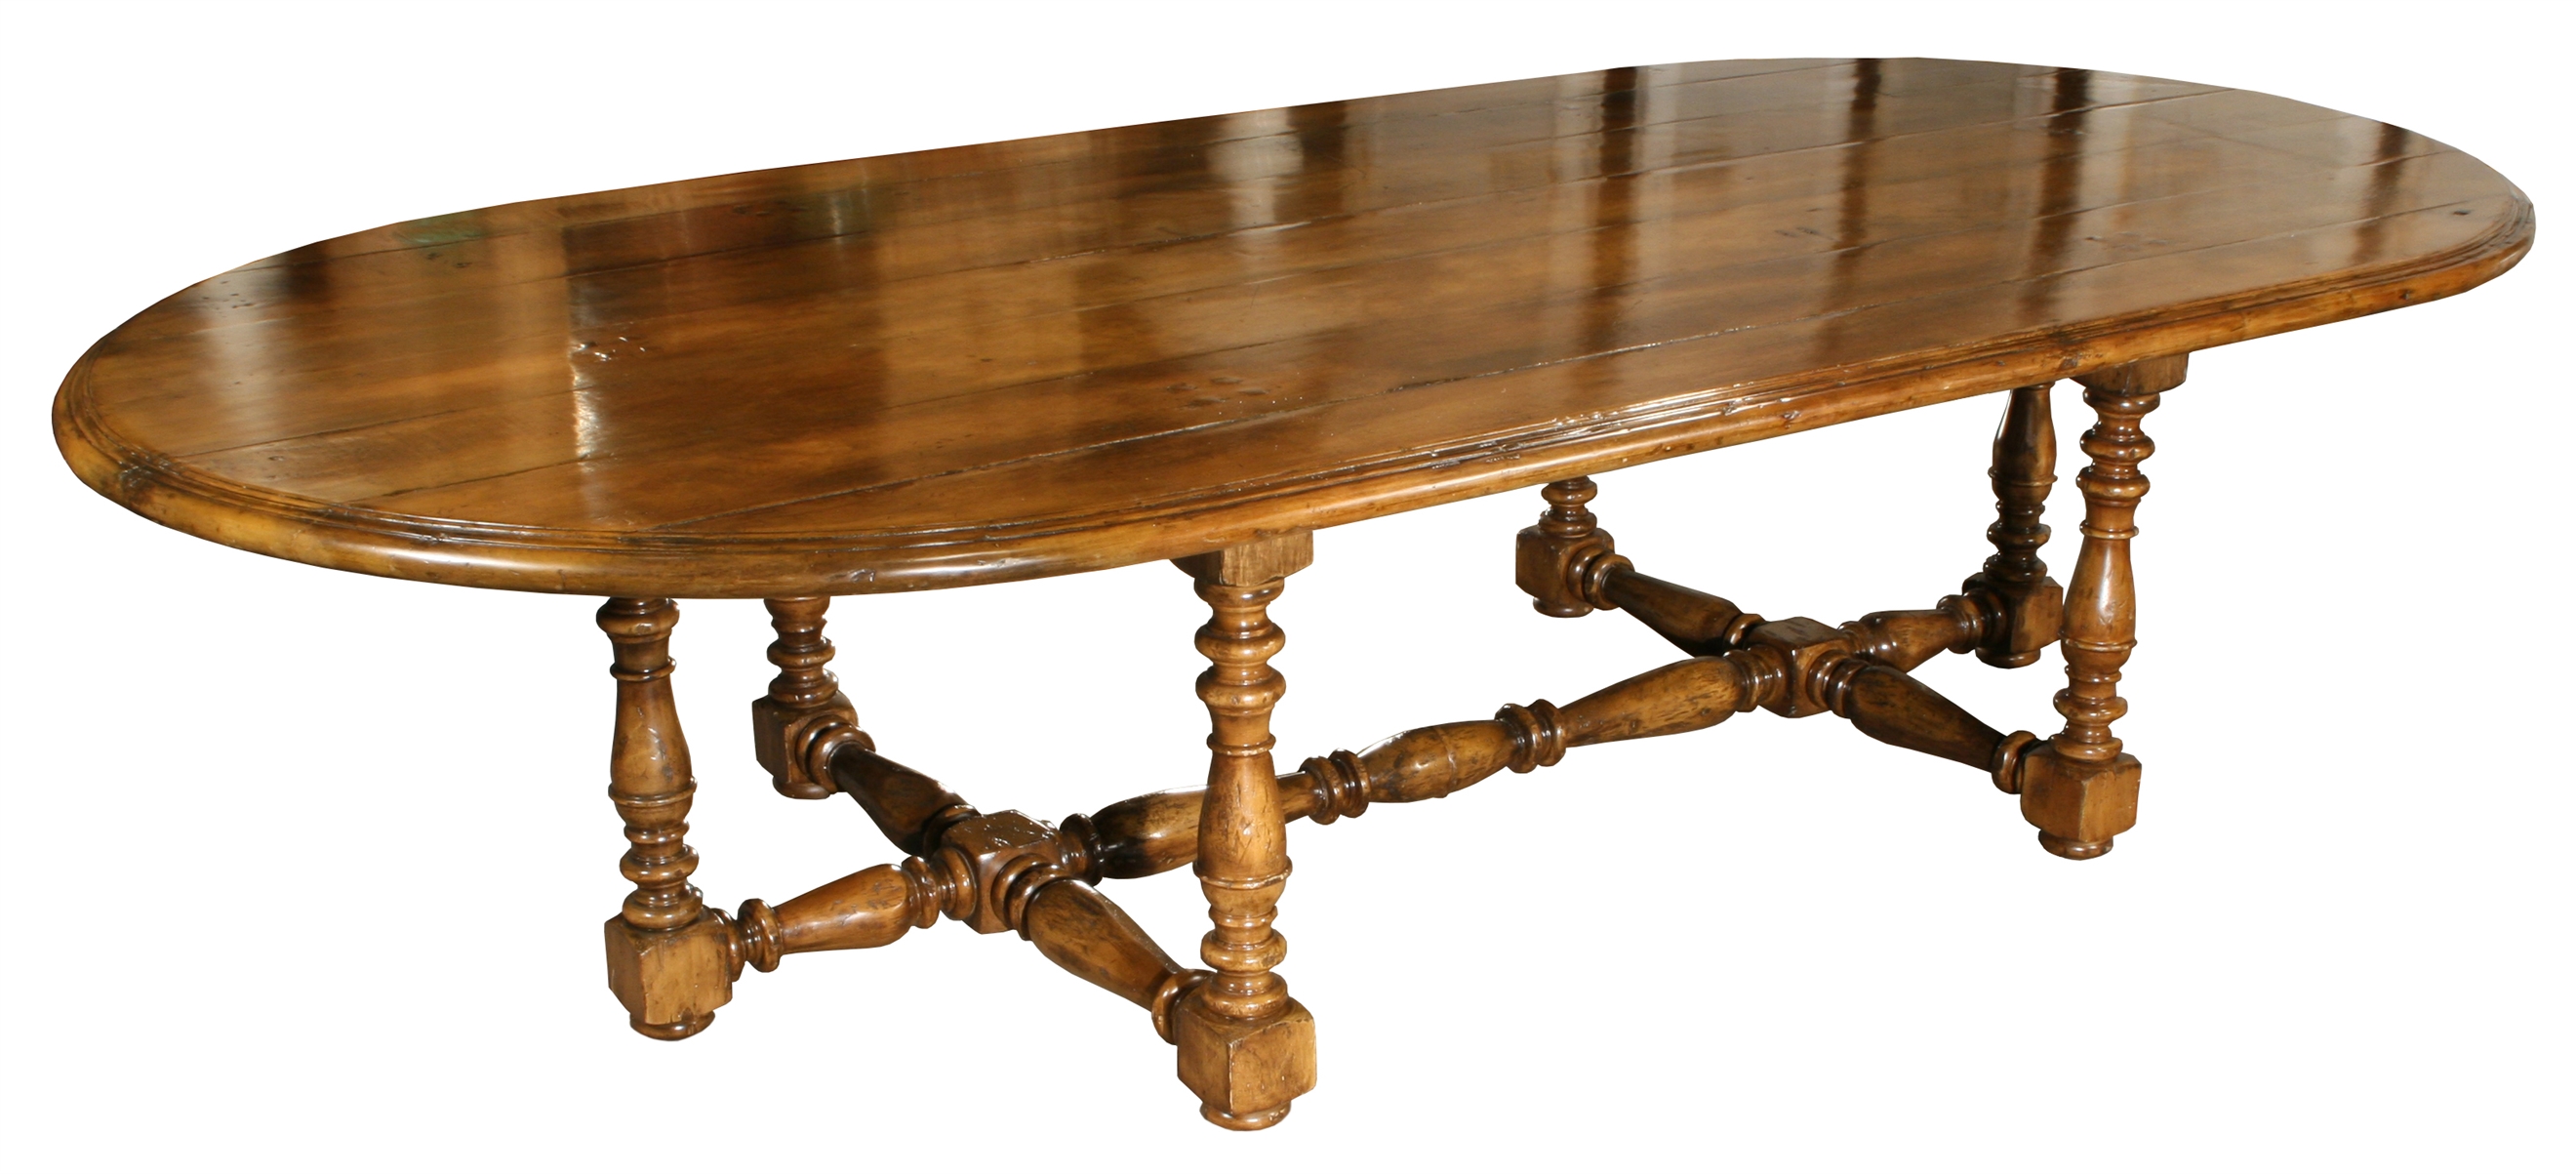 Rouen Dining Table